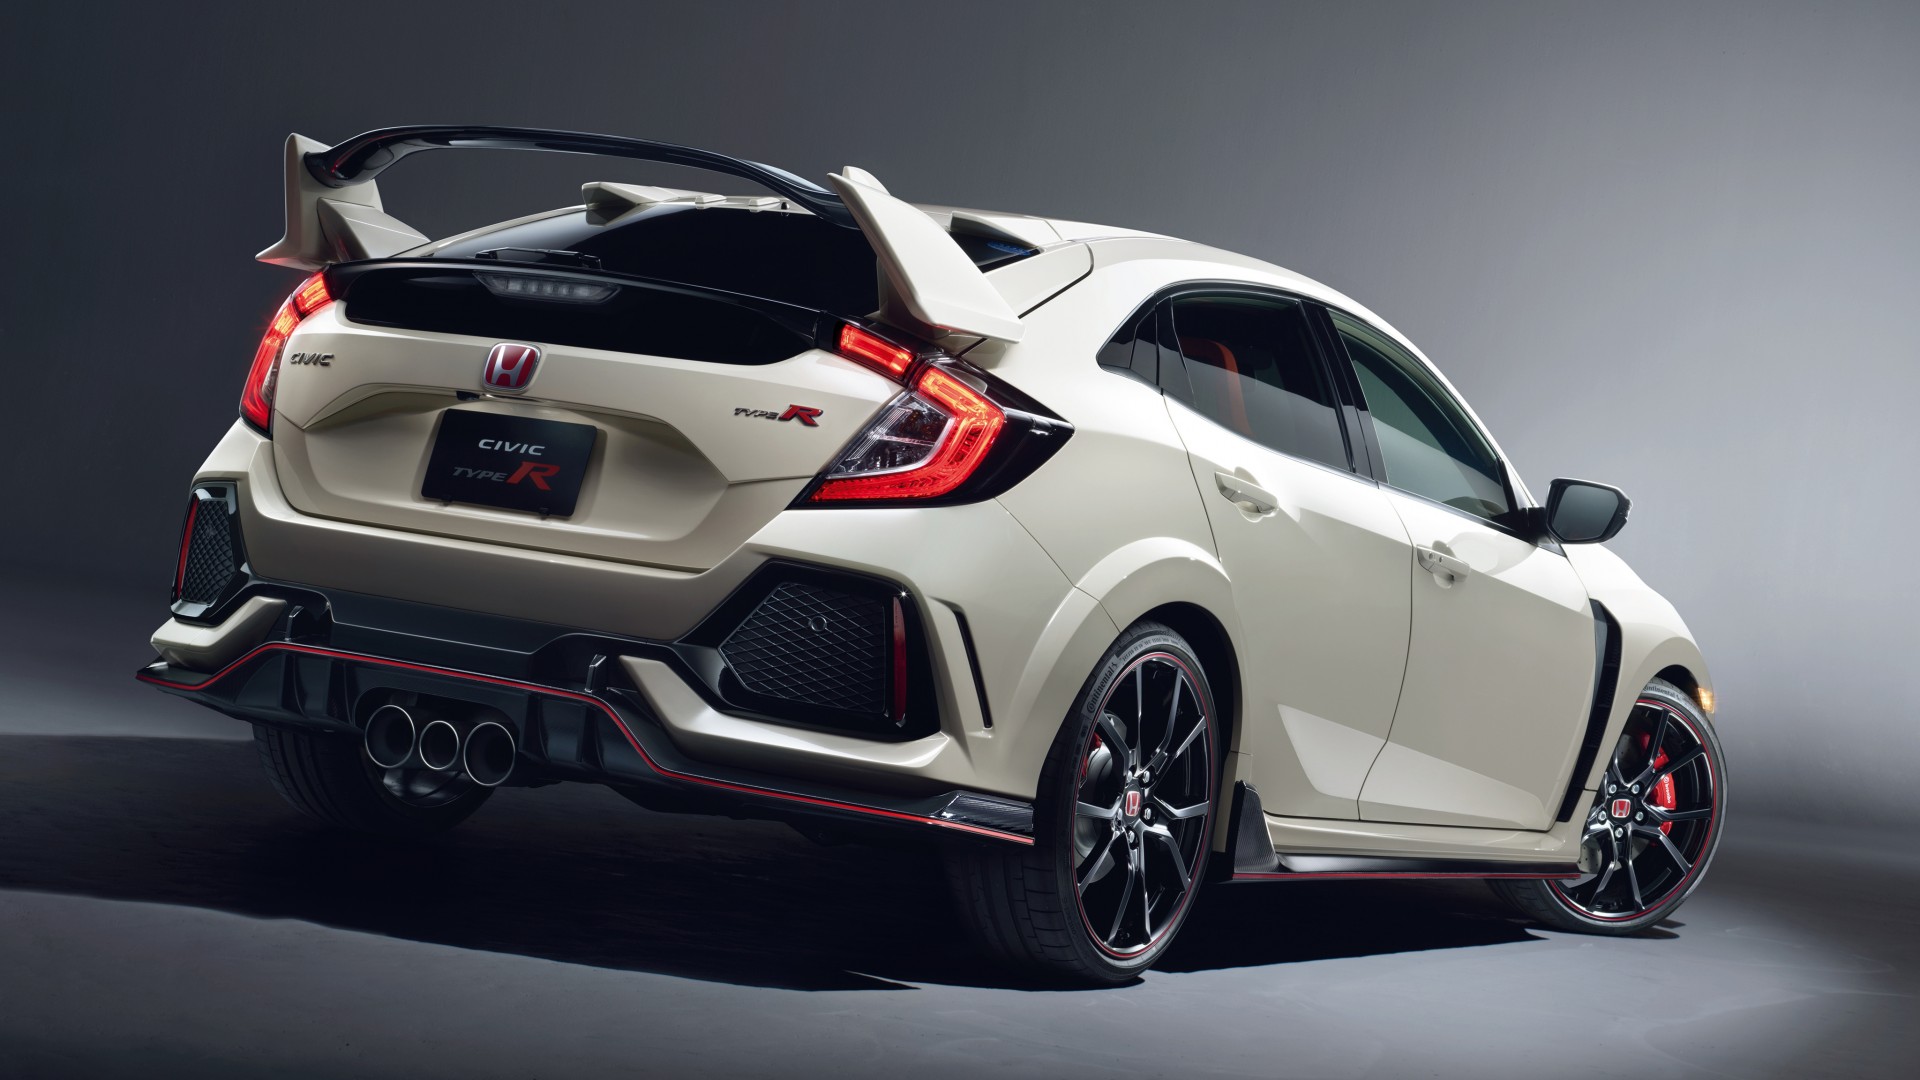 17 Honda Civic Type R 4 Wallpaper Hd Car Wallpapers Wallpapers Book Your 1 Source For Free Download Hd 4k High Quality Wallpapers